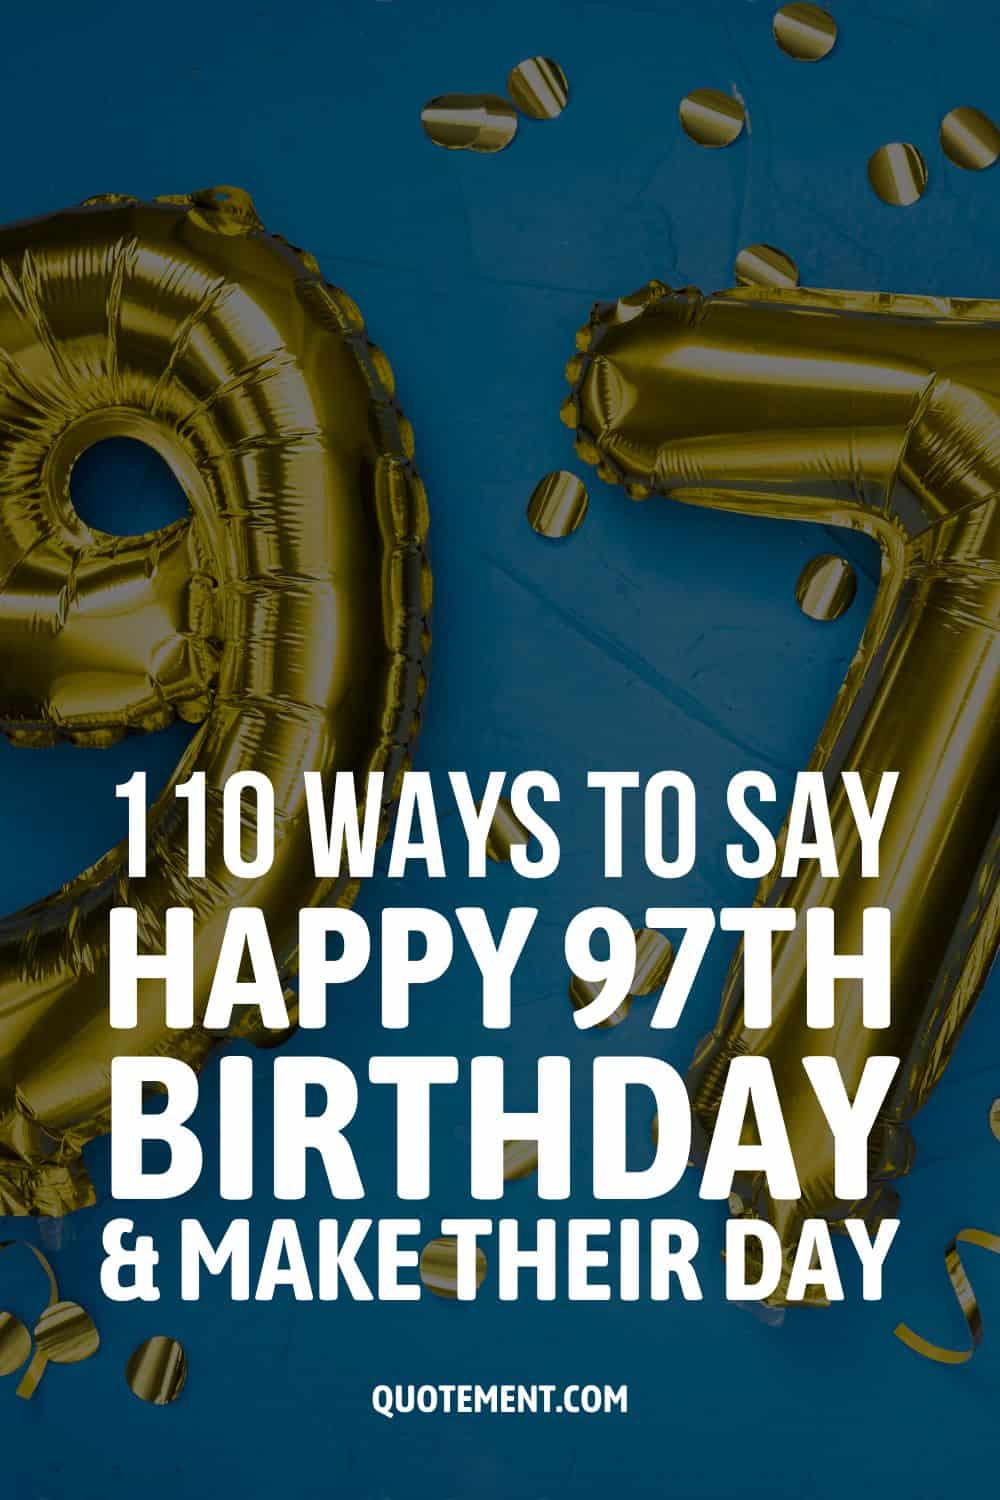 110 Ways To Say Happy 97th Birthday & Make Their Day
